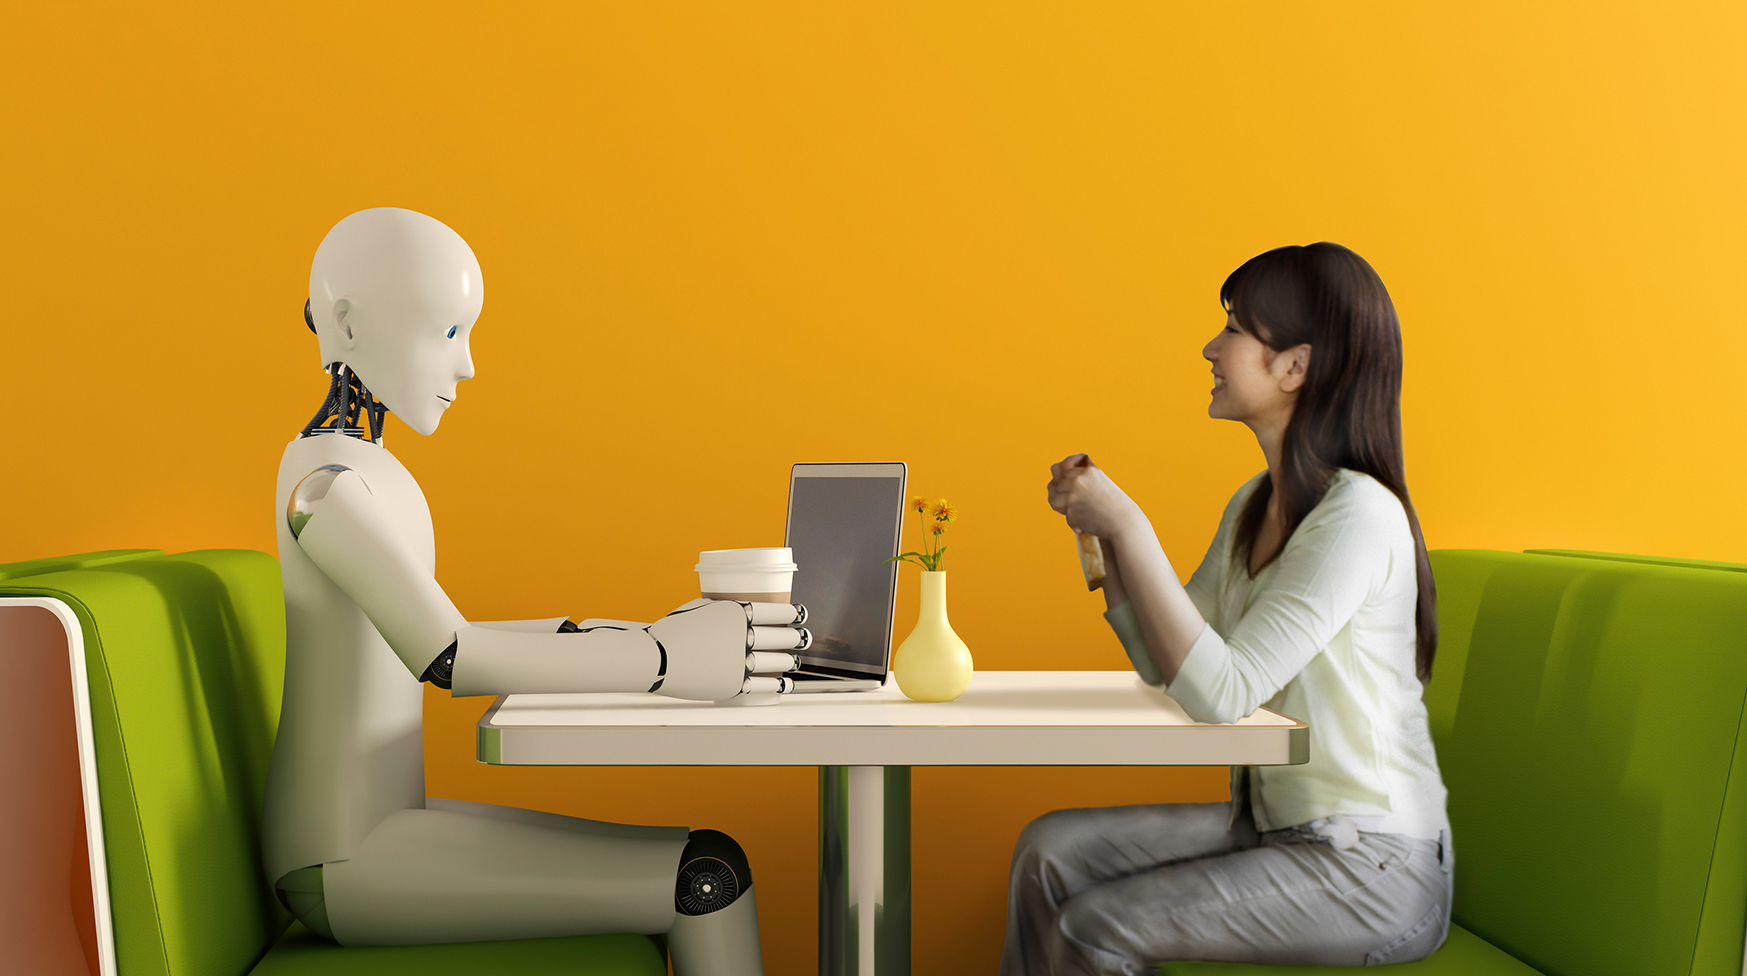 A robot and a human sitting in a booth having coffee together